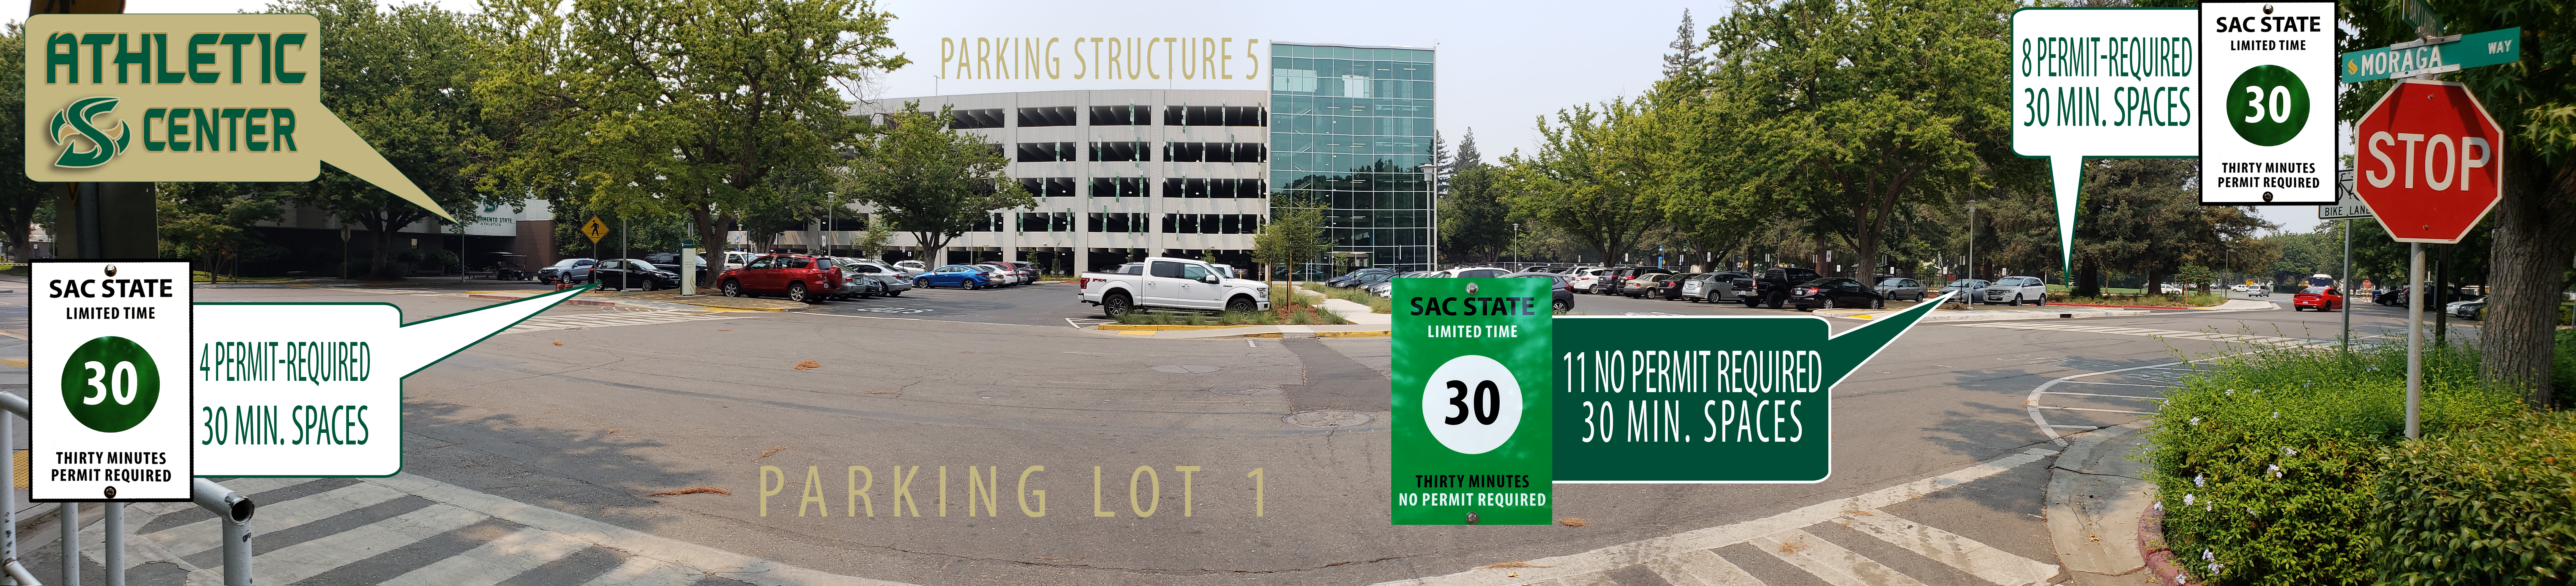 image of Parking Lot 1 showing 30 minute parking on both east and west ends of the lot